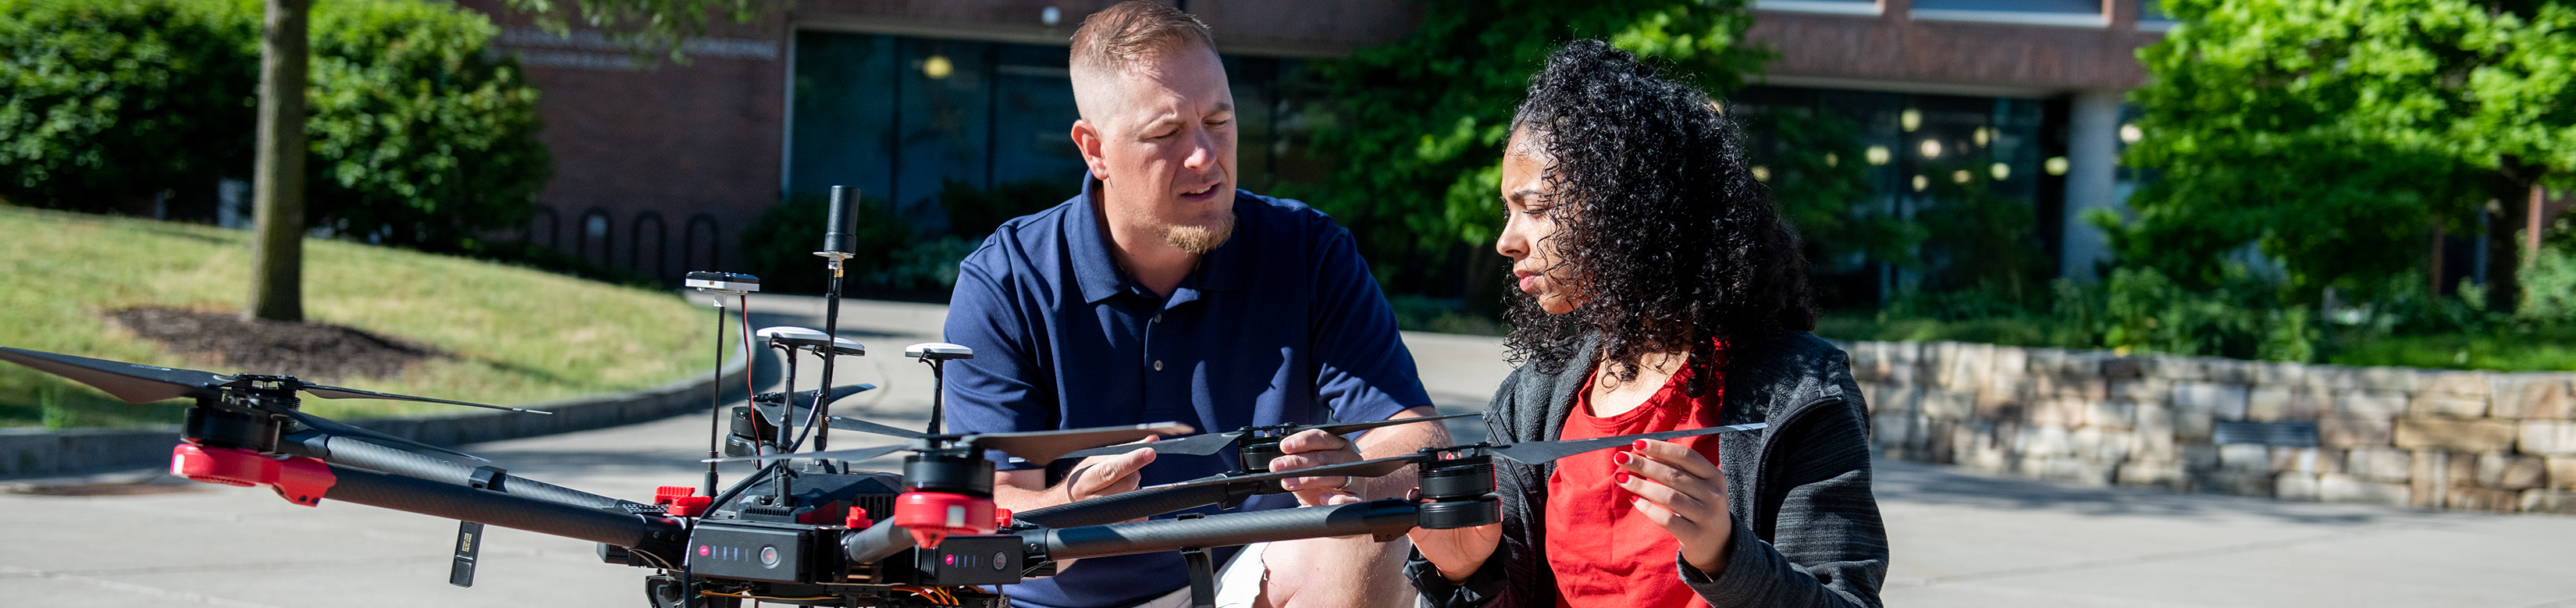 Professor and student studying drone technology, showing diverse ethnicities and gender